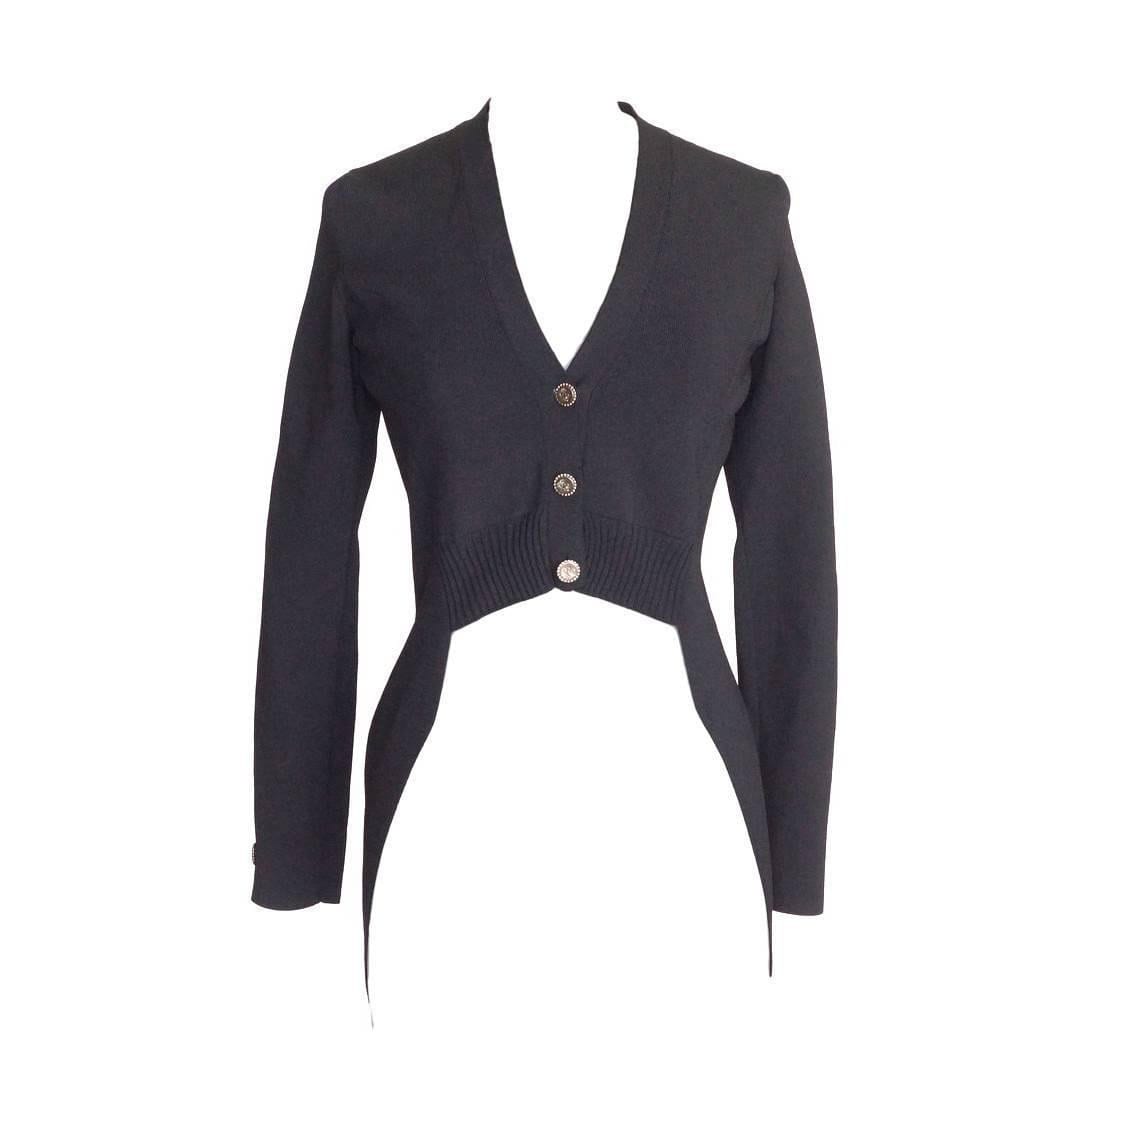 Chanel 11P Jacket Black Sweater Tuxedo Tails Inspired Unique 34 / 2 nw –  Mightychic